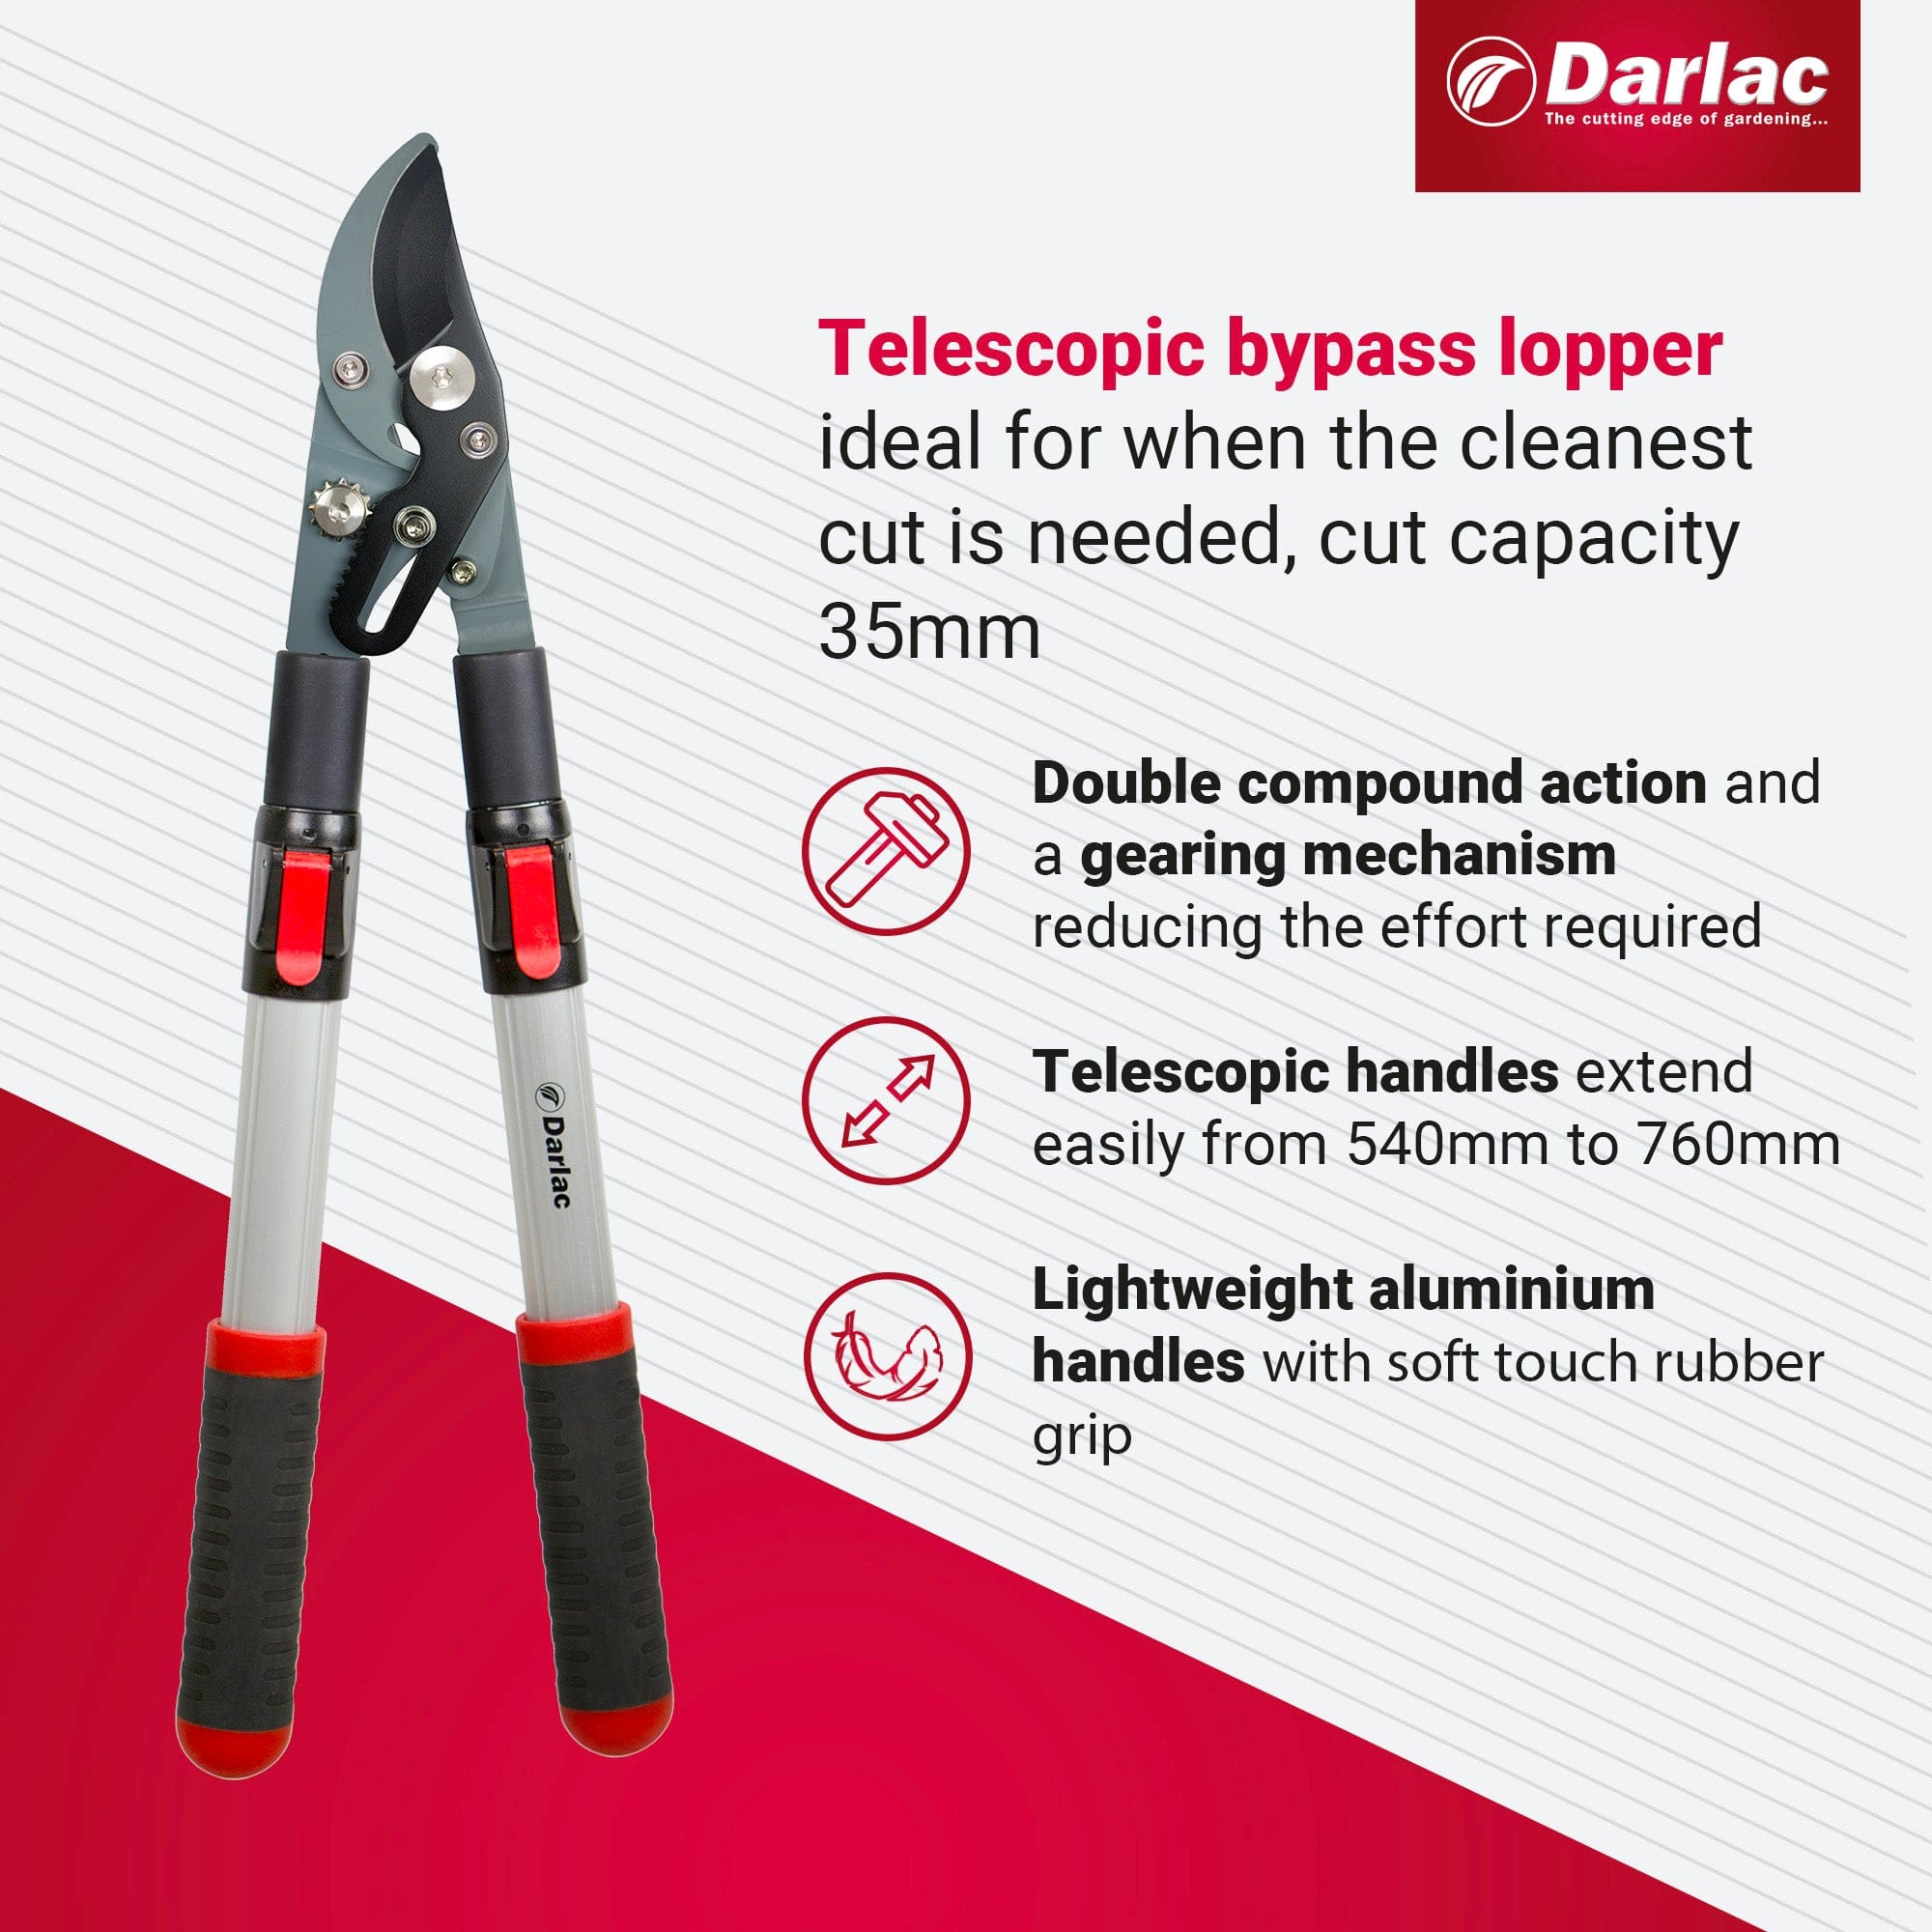 dt-brown HARDWARE Darlac Telescopic Bypass Lopper